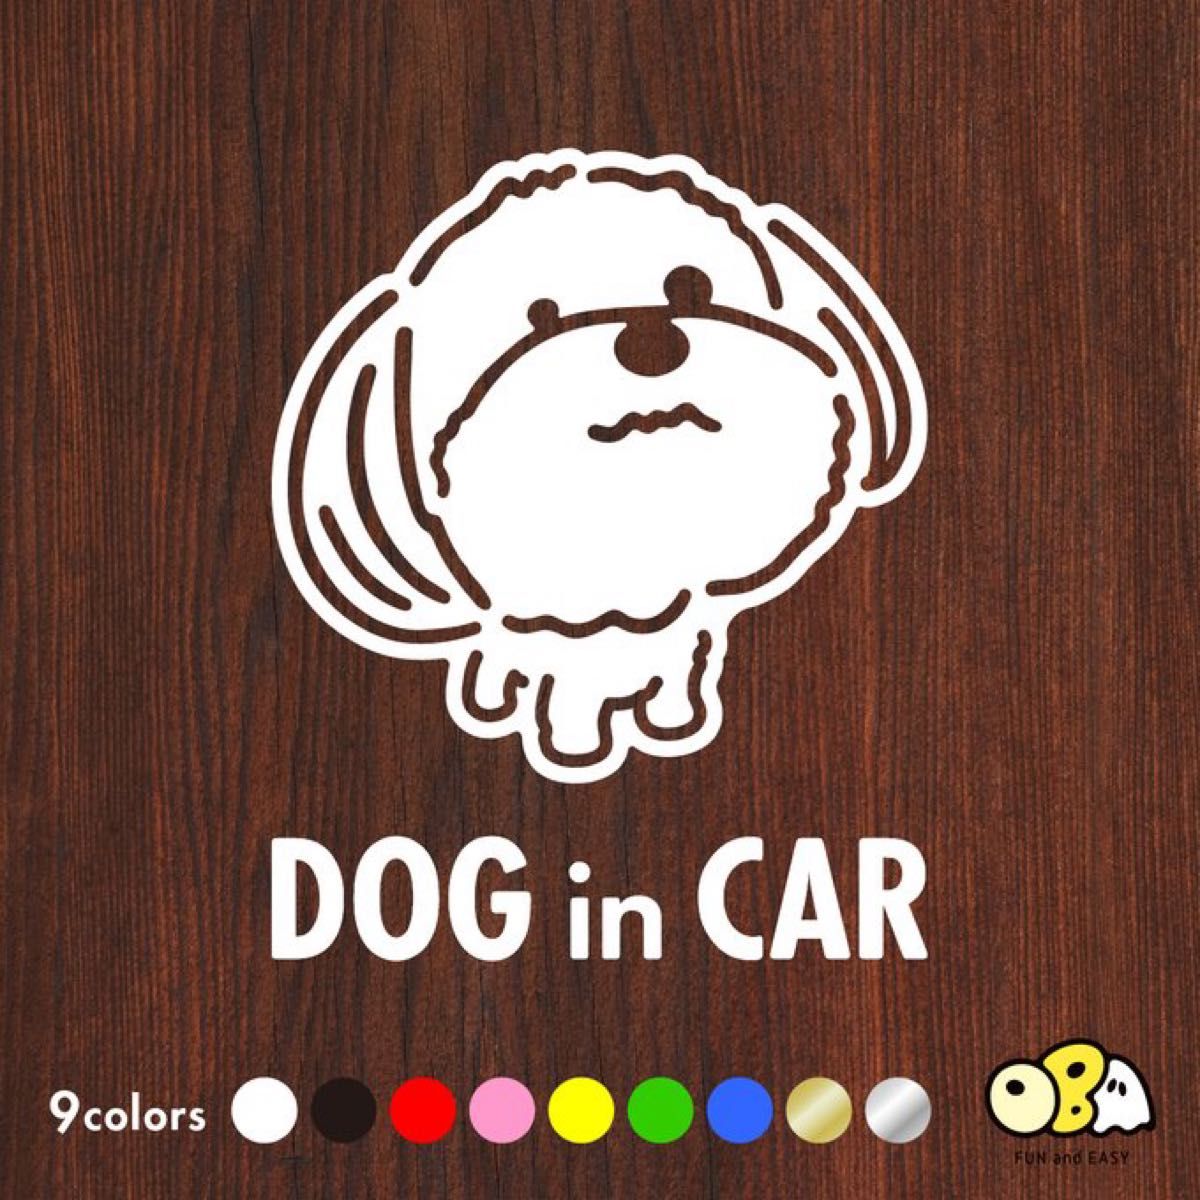 DOG IN CAR/シーズーA カッティングステッカー KIDS IN CAR・BABY IN CAR・SAFETY DRIVE